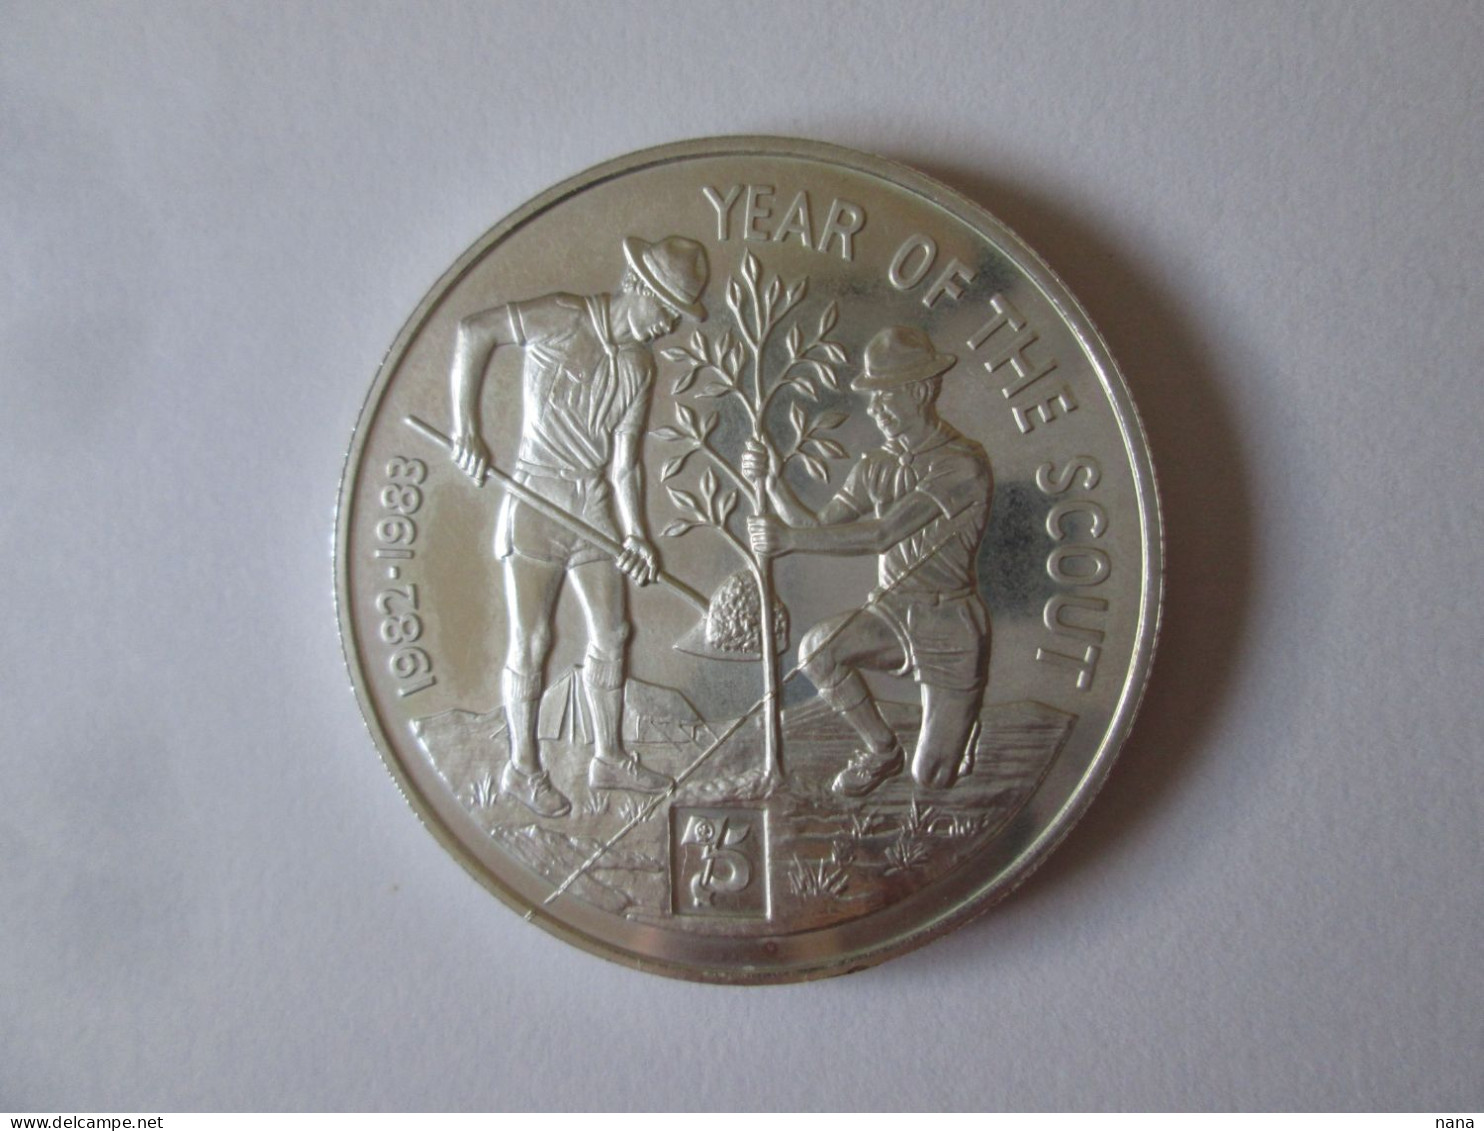 Rare! Ghana 50 Cedis 1984 Year Of The Scout Silver/Argent.925 Coin,diam.=39 Mm,weight/poids=28.44 Gr.mintage=10000 Pcs - Ghana